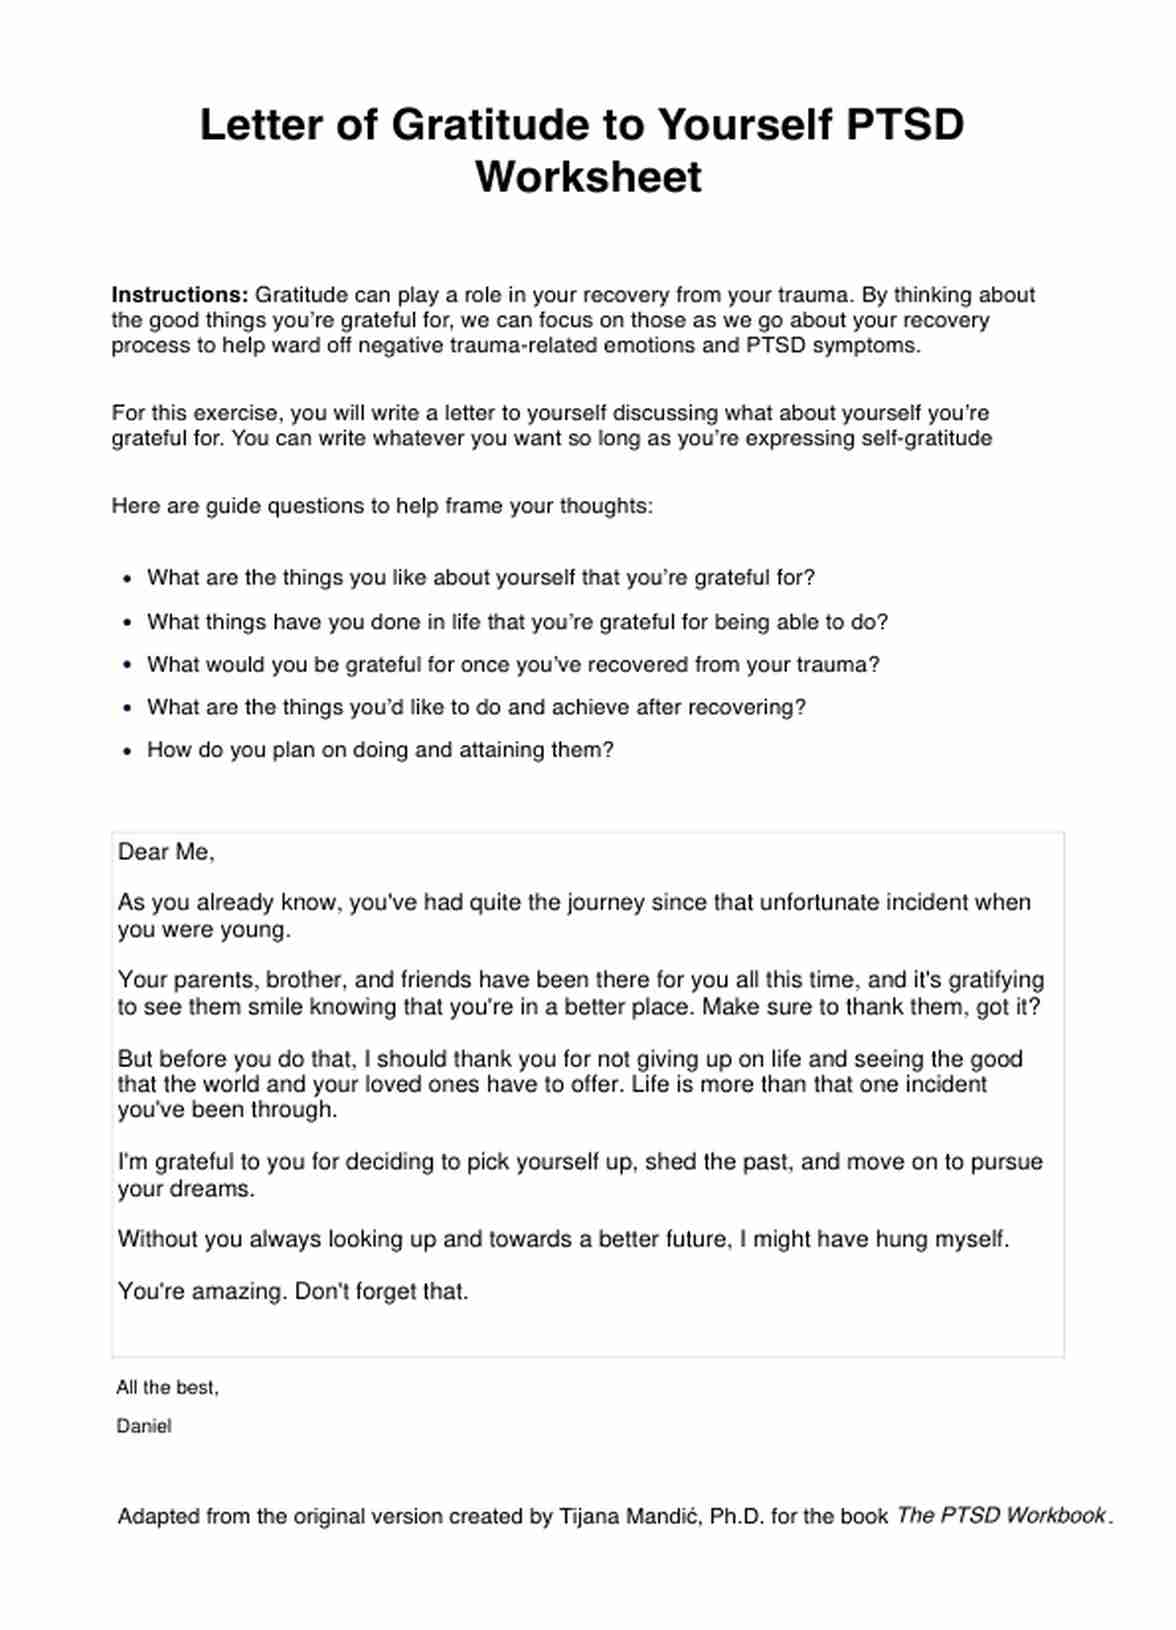 Letter of Gratitude to Yourself PTSD Worksheet PDF Example